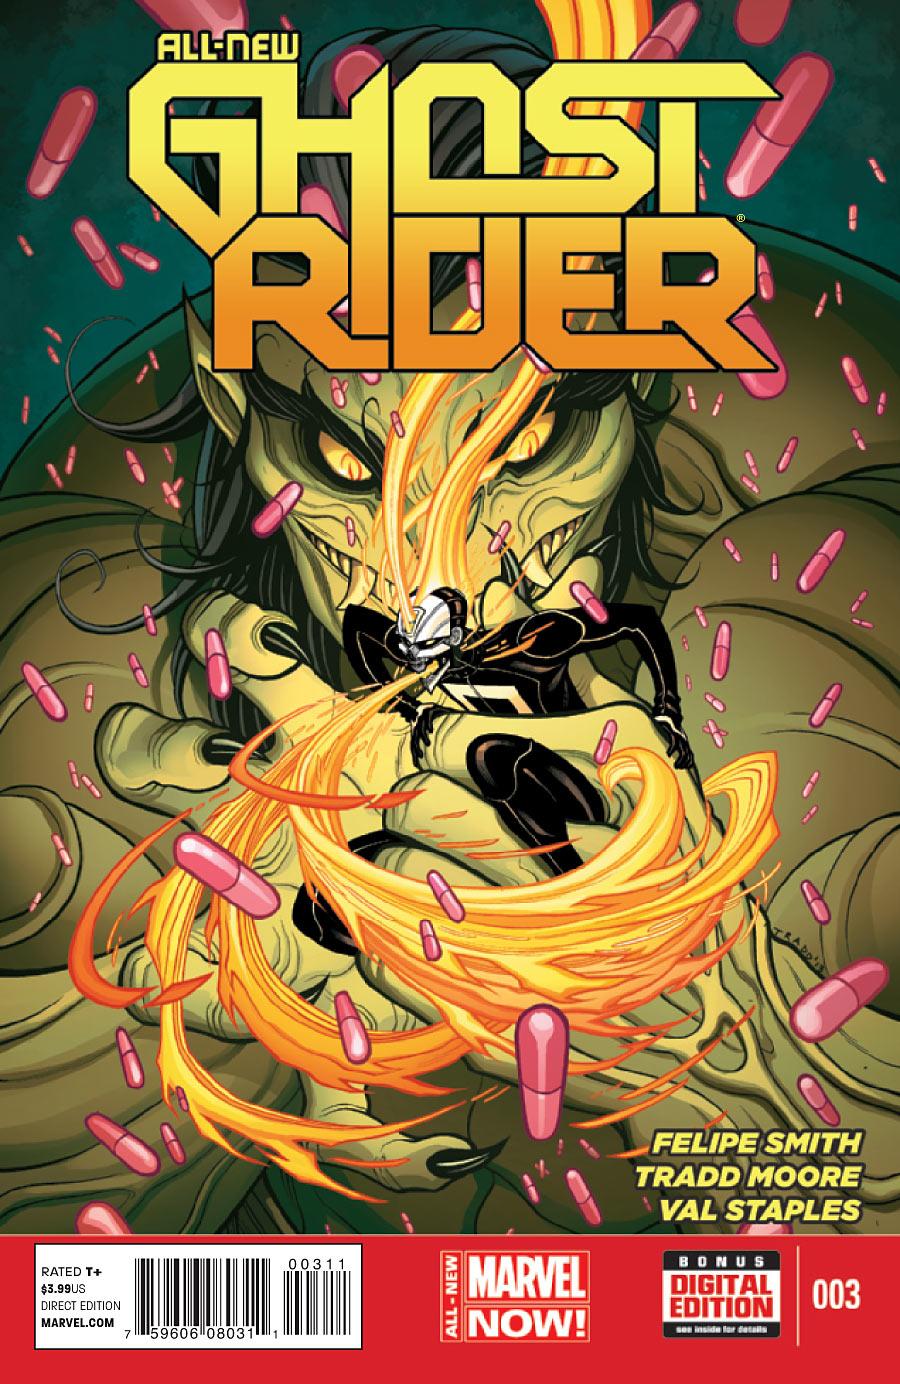 All-New Ghost Rider Vol. 1 #3